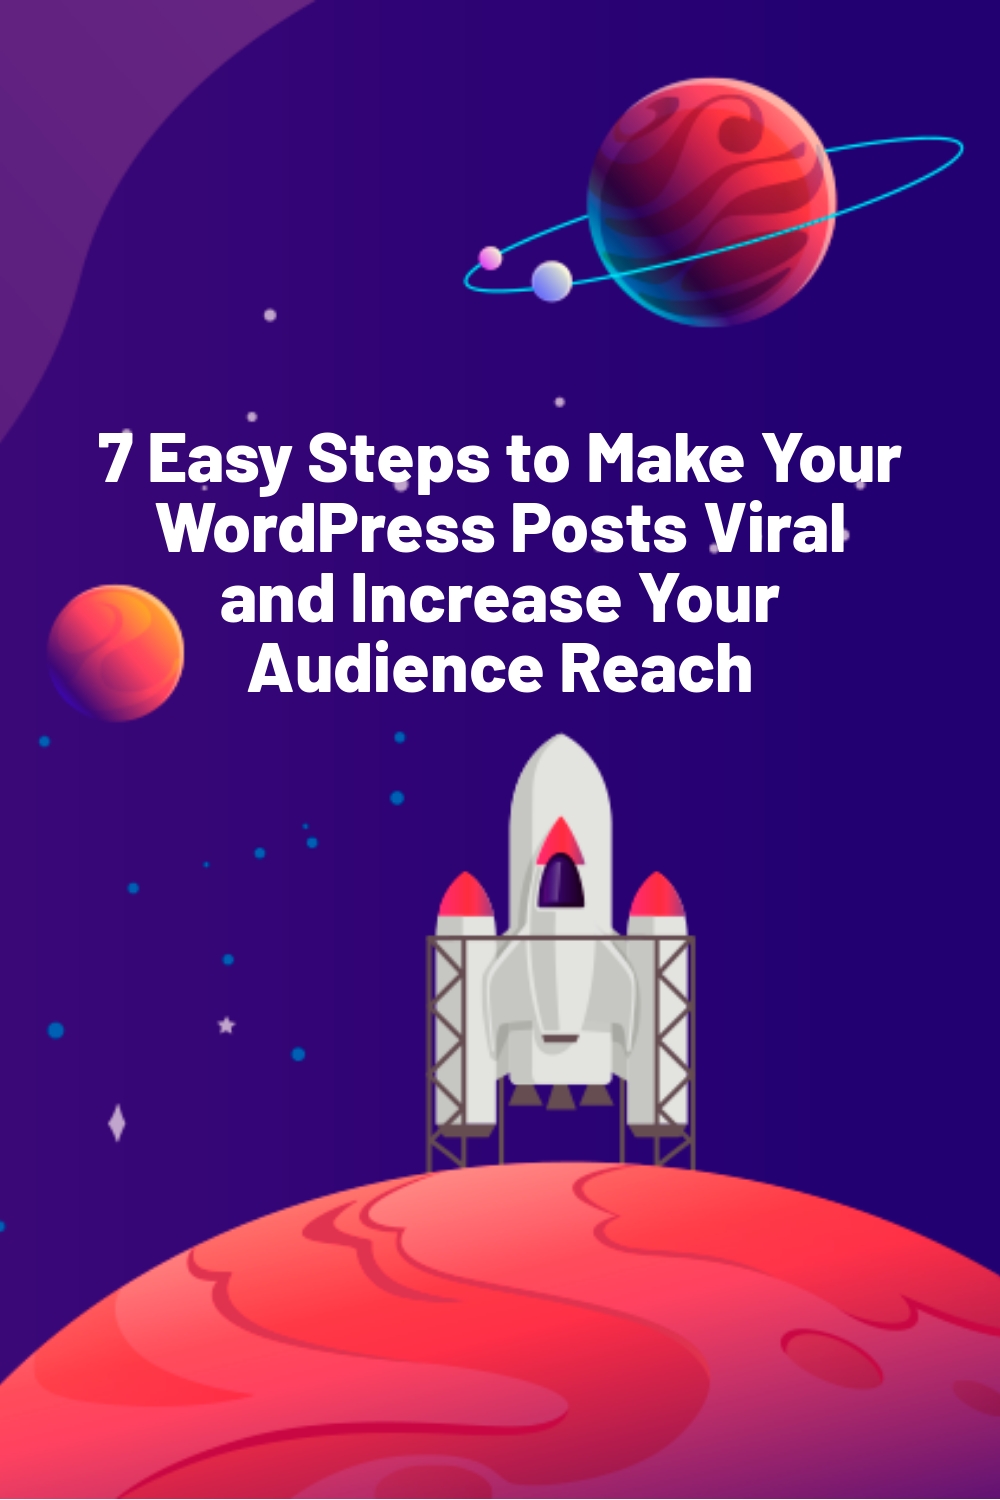 7 Easy Steps to Make Your WordPress Posts Viral and Increase Your Audience Reach